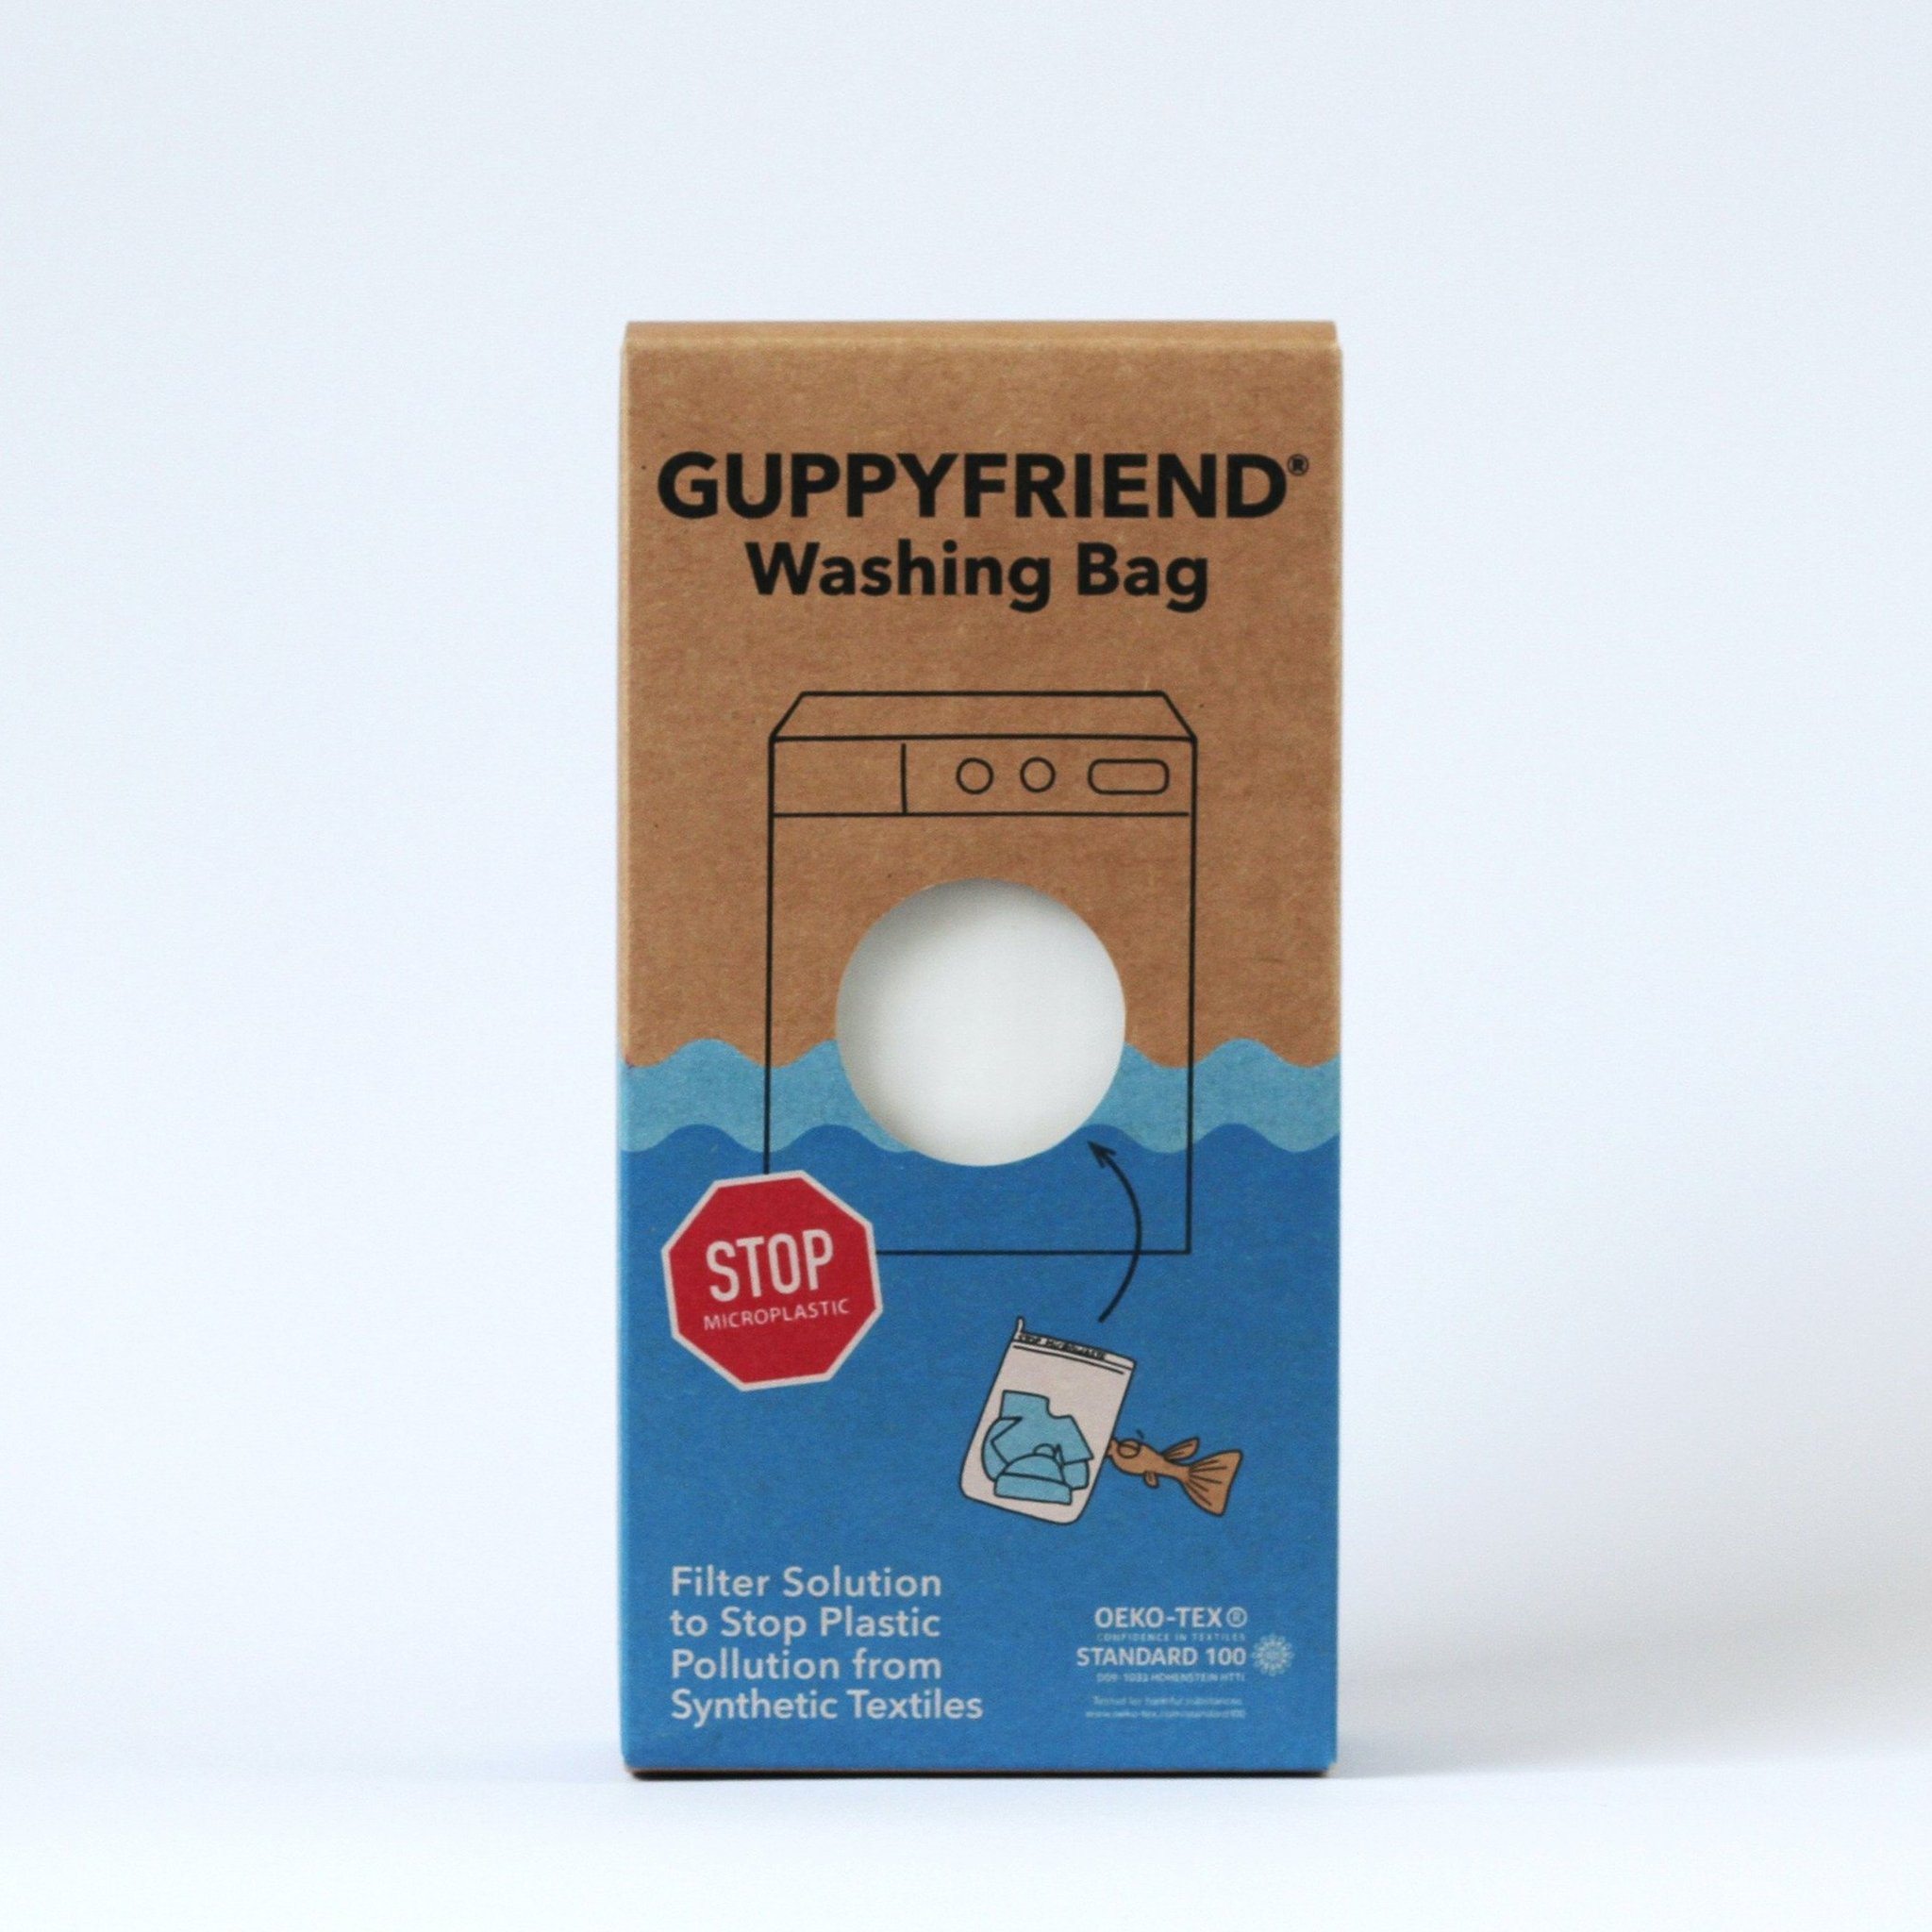 Guppyfriend Washing Bag - Catch the microplastics during laundry